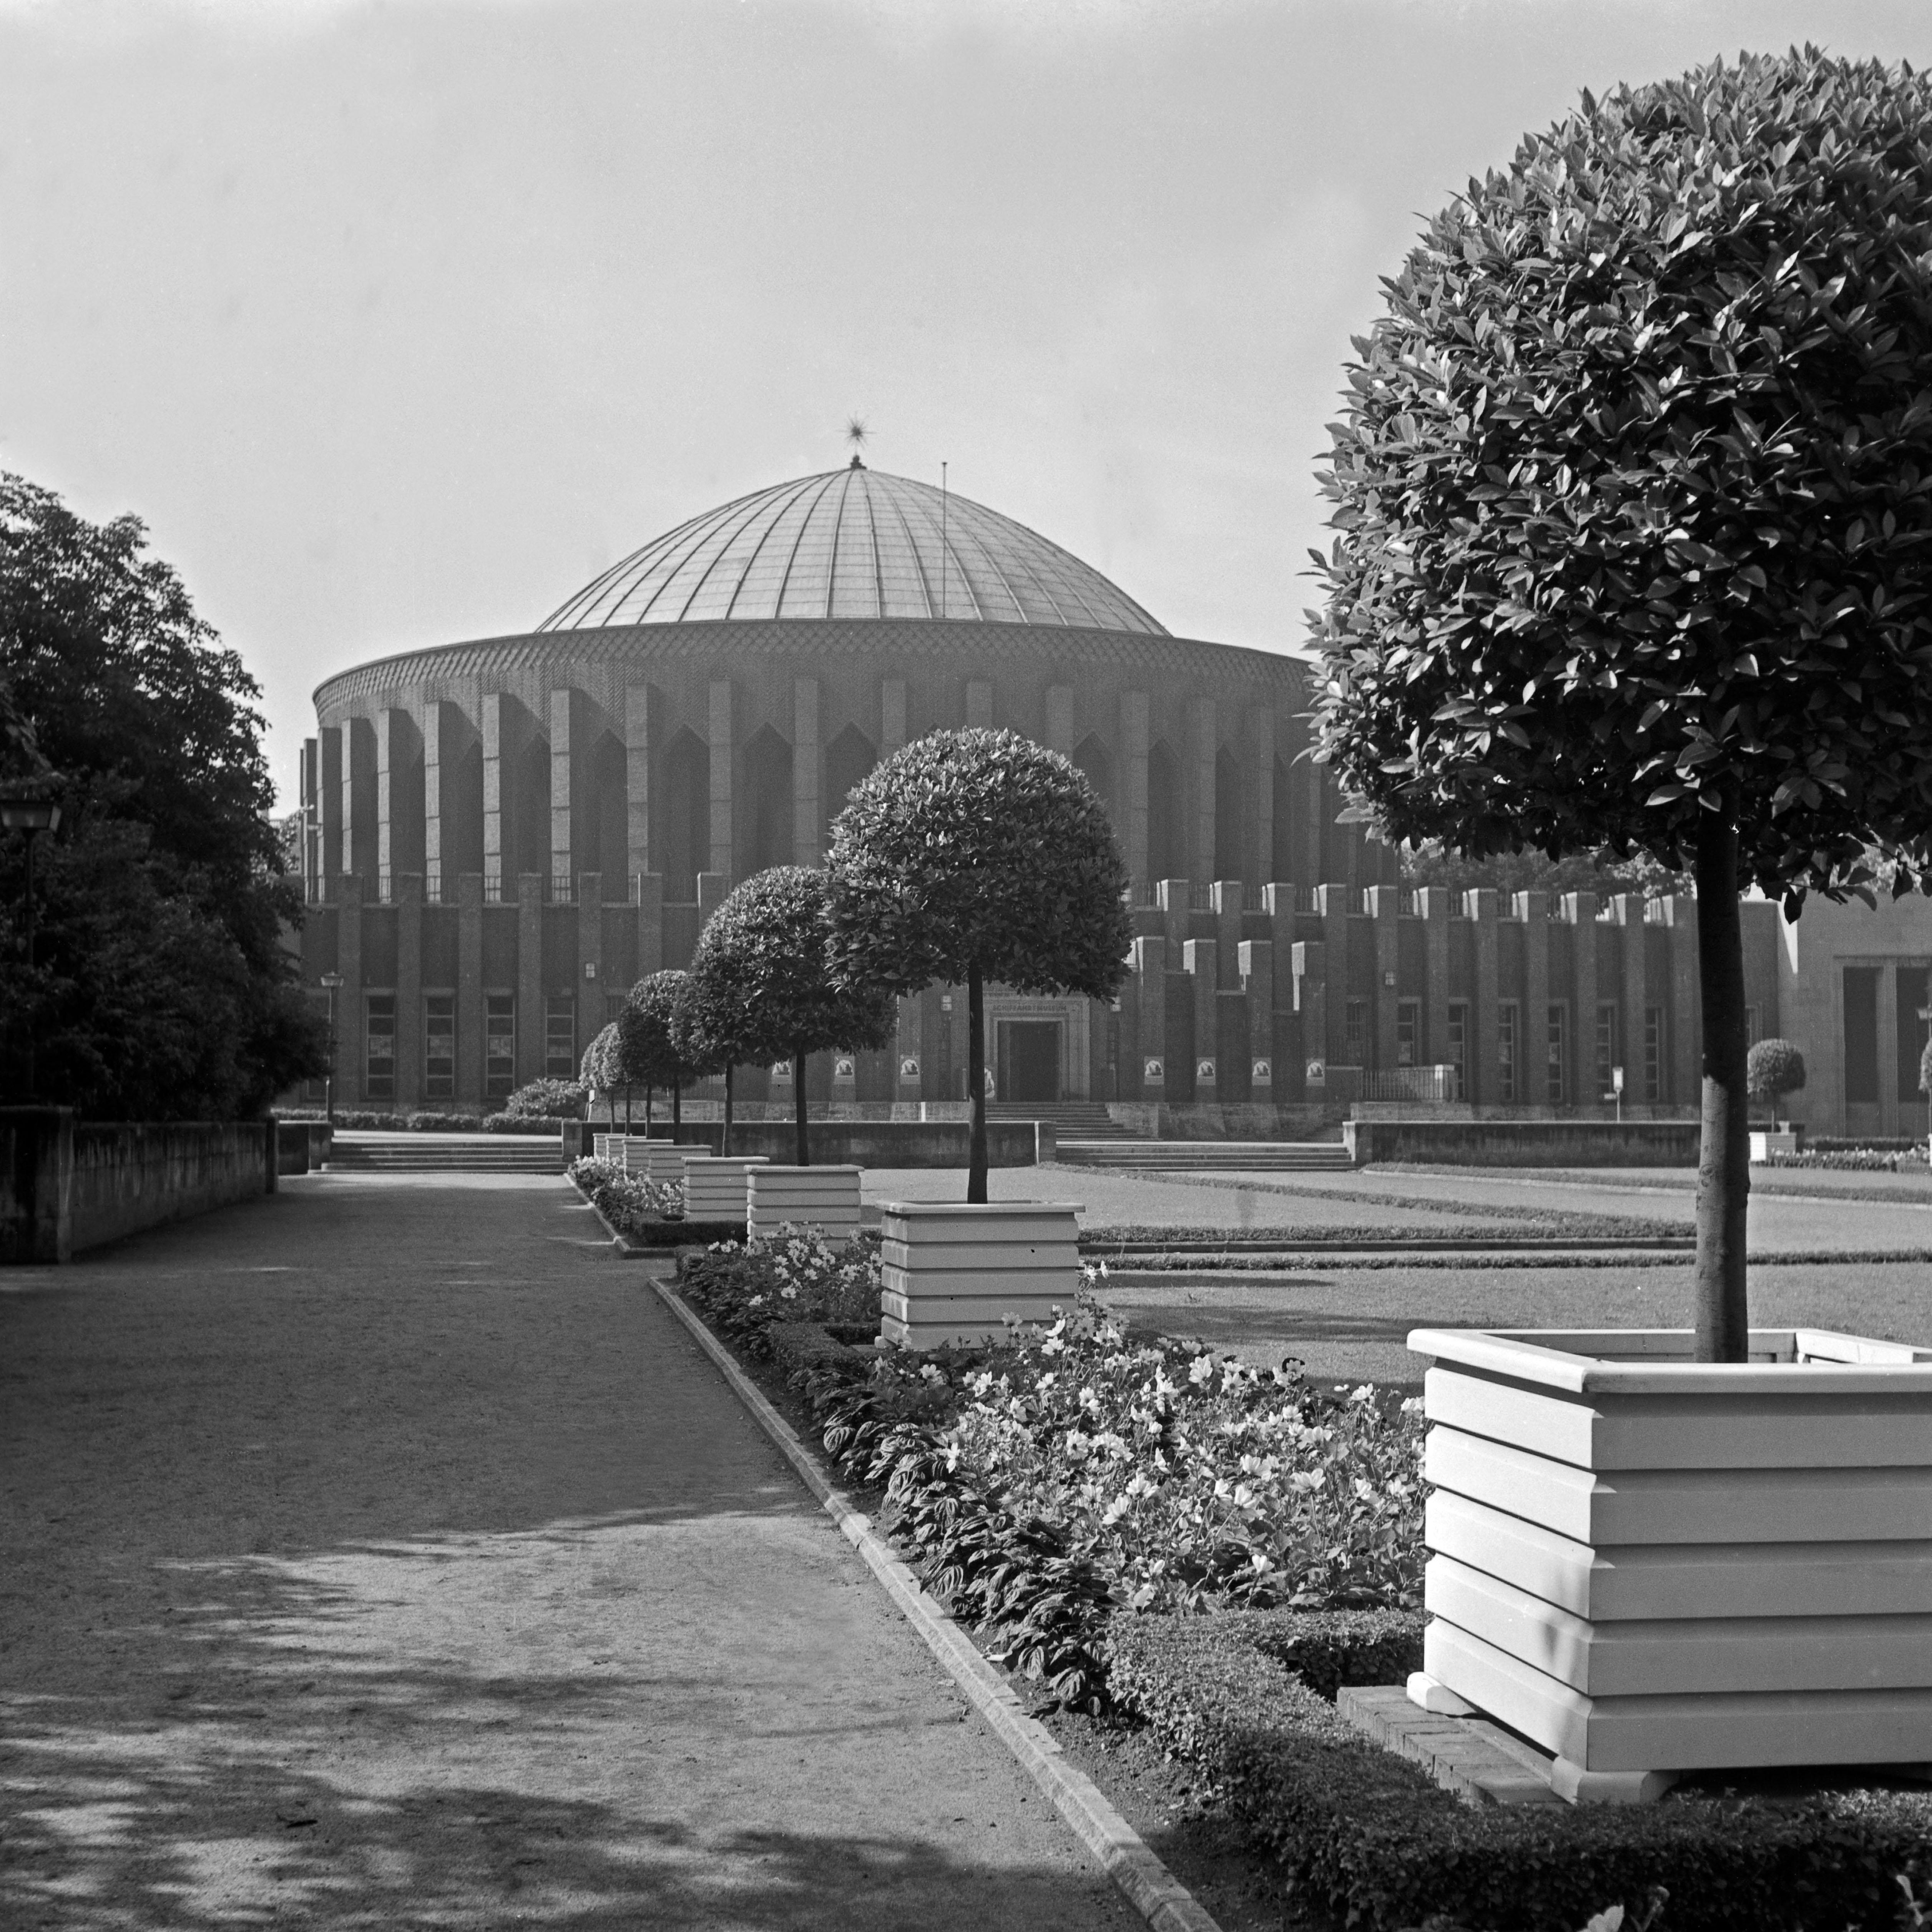 Karl Heinrich Lämmel Black and White Photograph - Duesseldorf planetarium and Shipping Museum, Germany 1937 Printed Later 